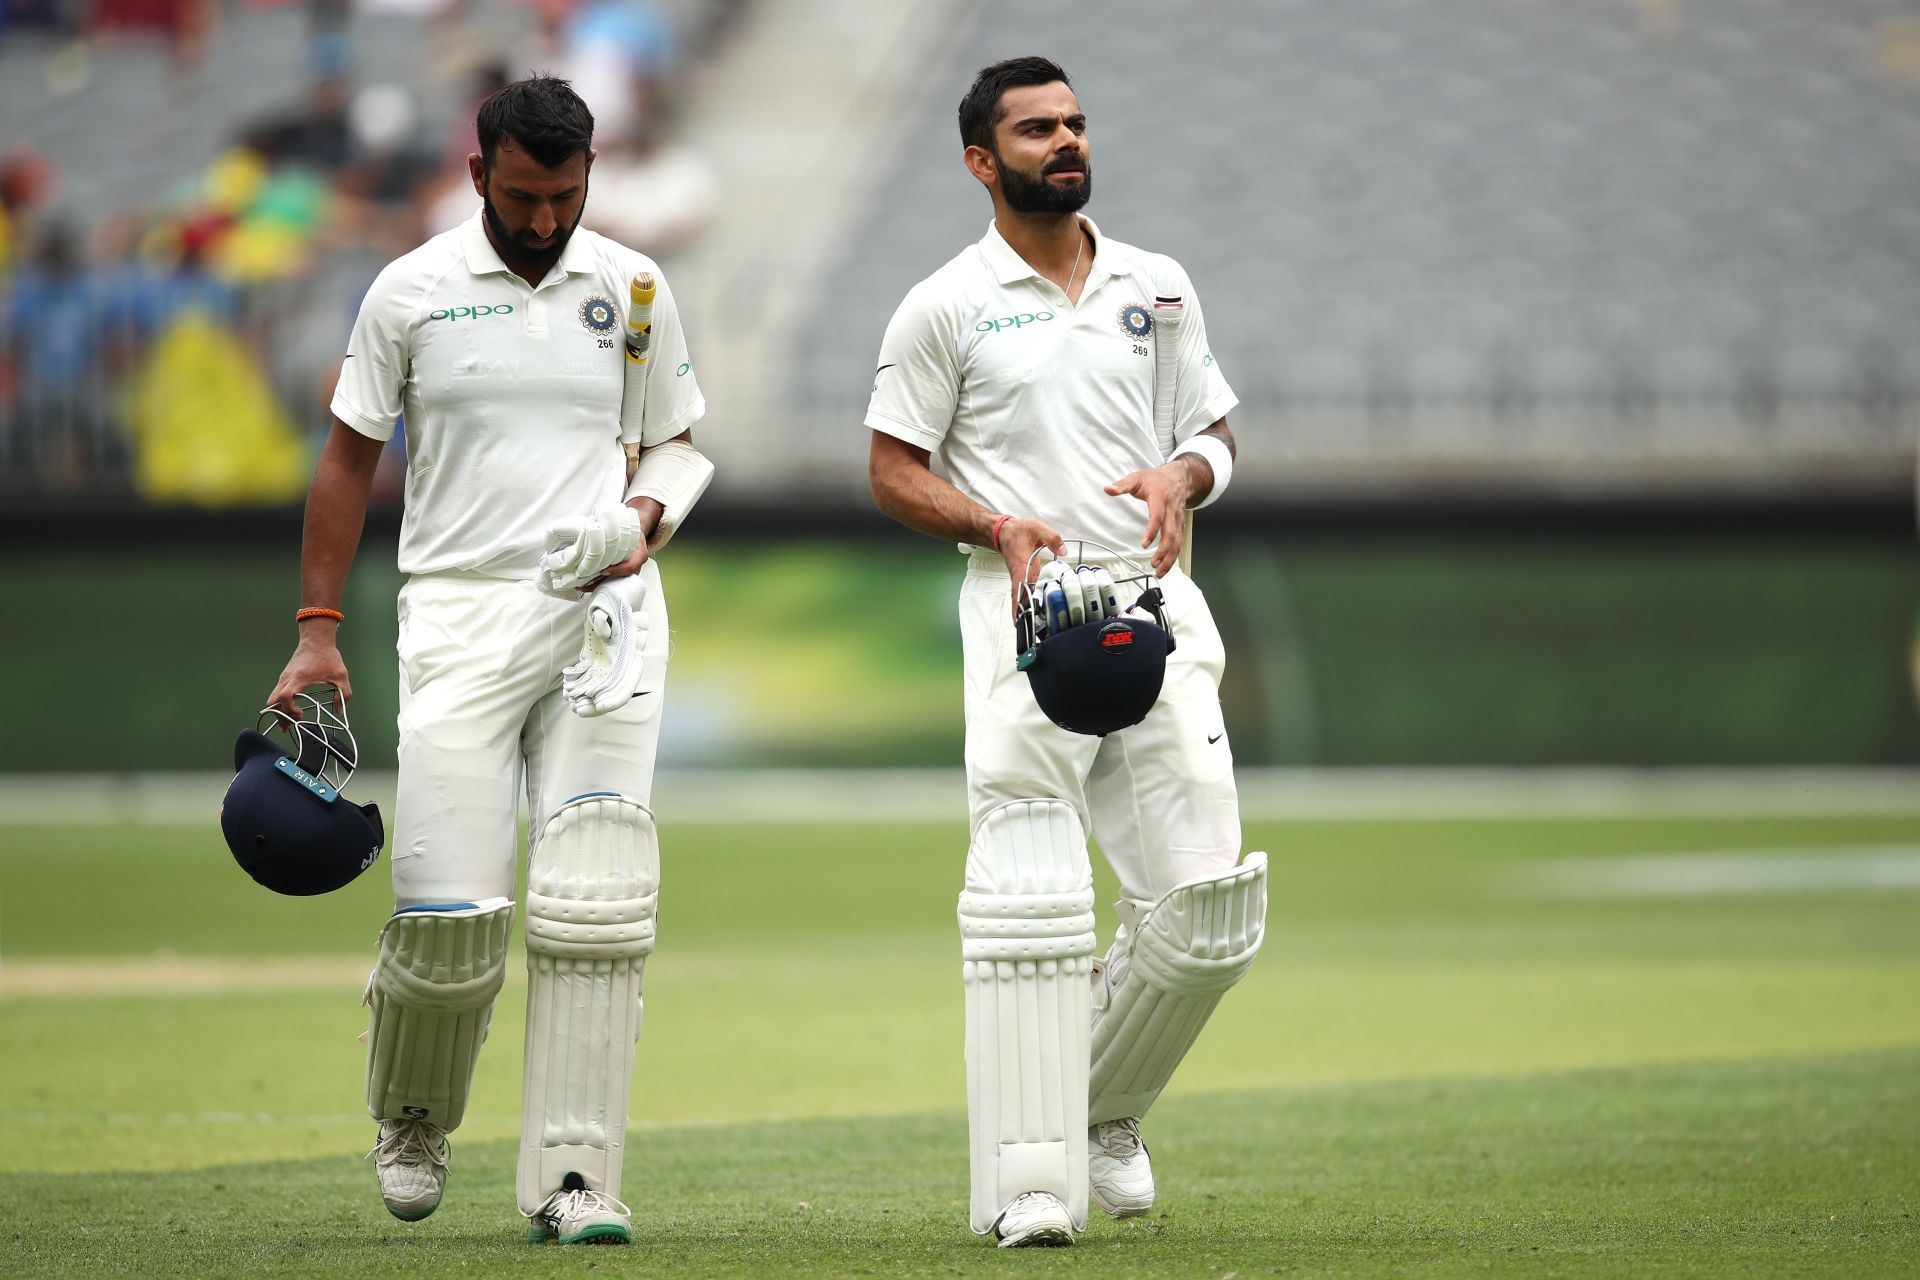 Virat Kohli was quite critical about Pujara&#039;s batting methods at the start of his tenure as captain